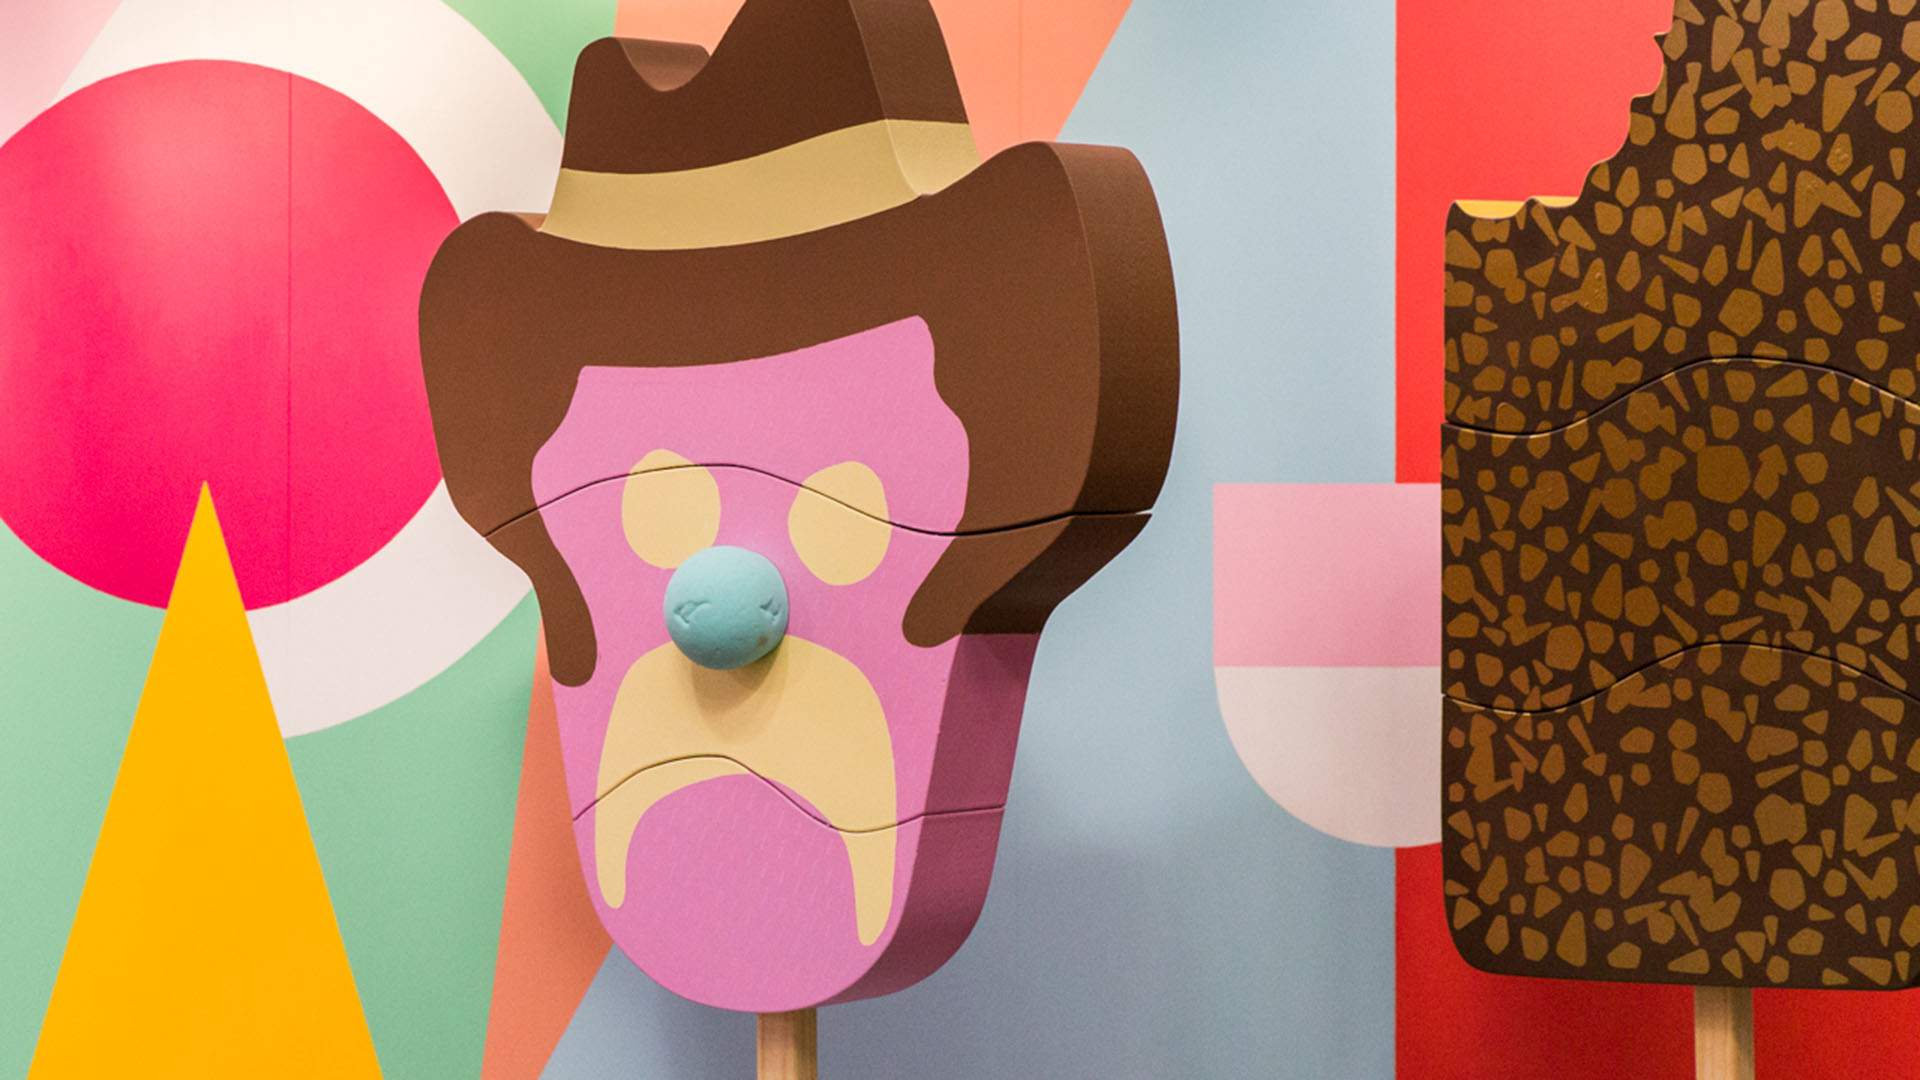 Melbourne's New Pop-Up Dessert Museum Is Here to Give You the Ultimate Sugar Rush